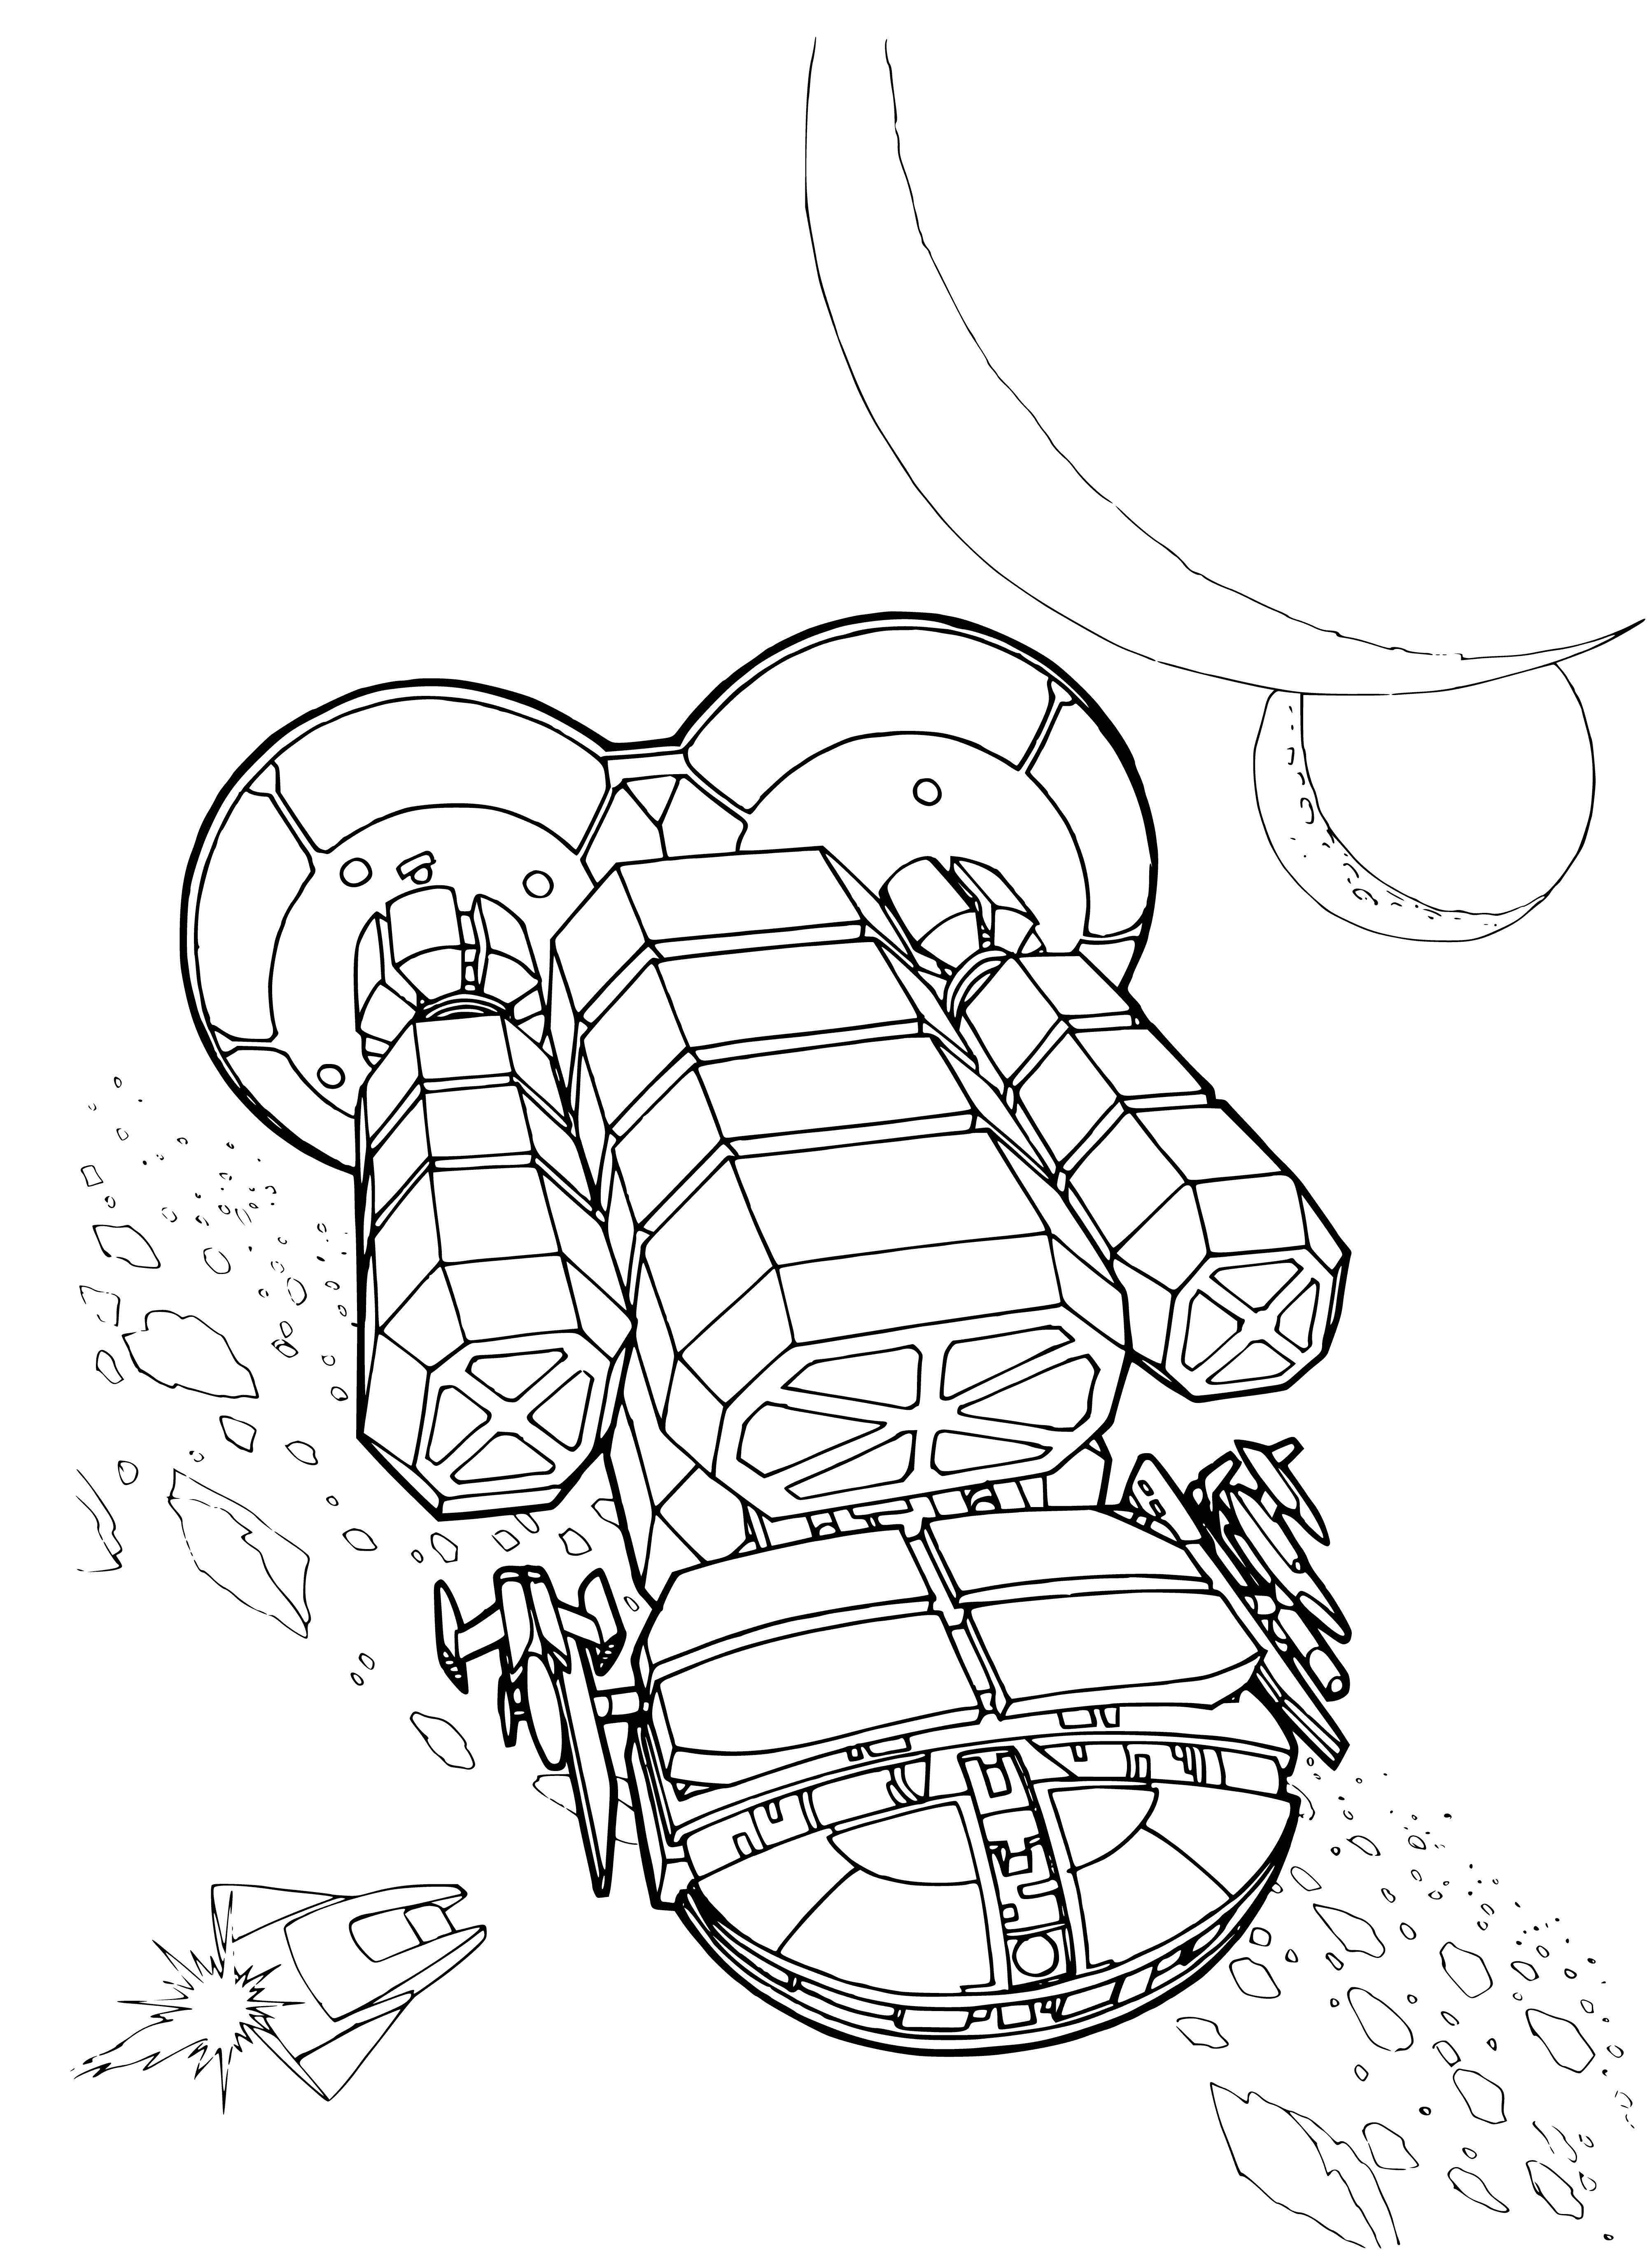 Interplanetary technology coloring page